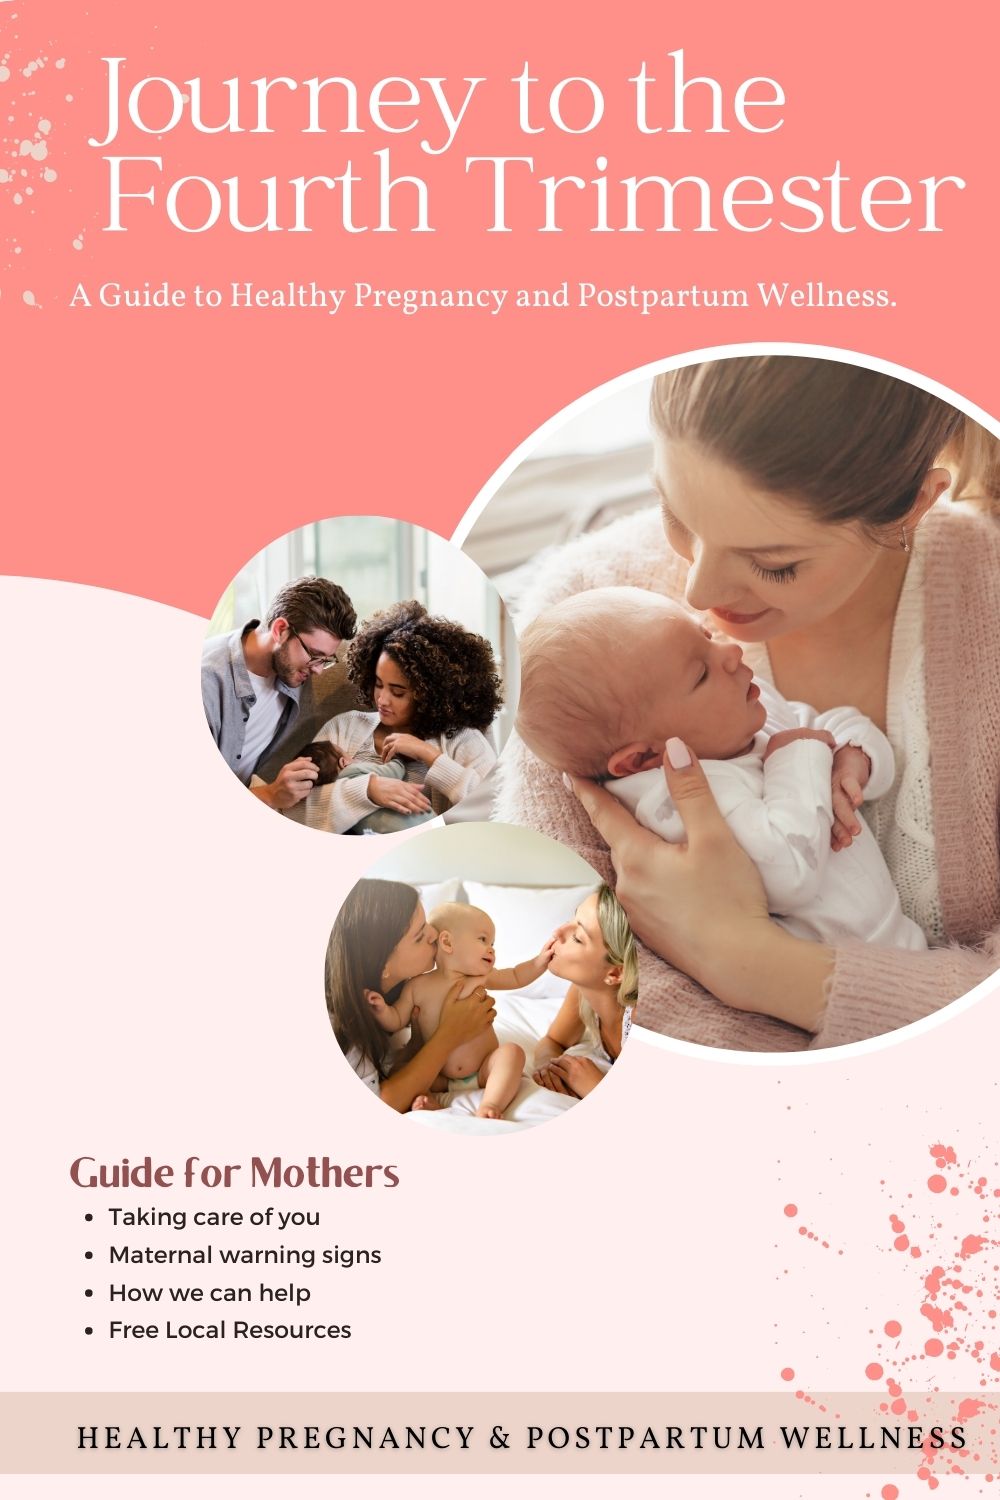 Journey to the Fourth Trimester book 1